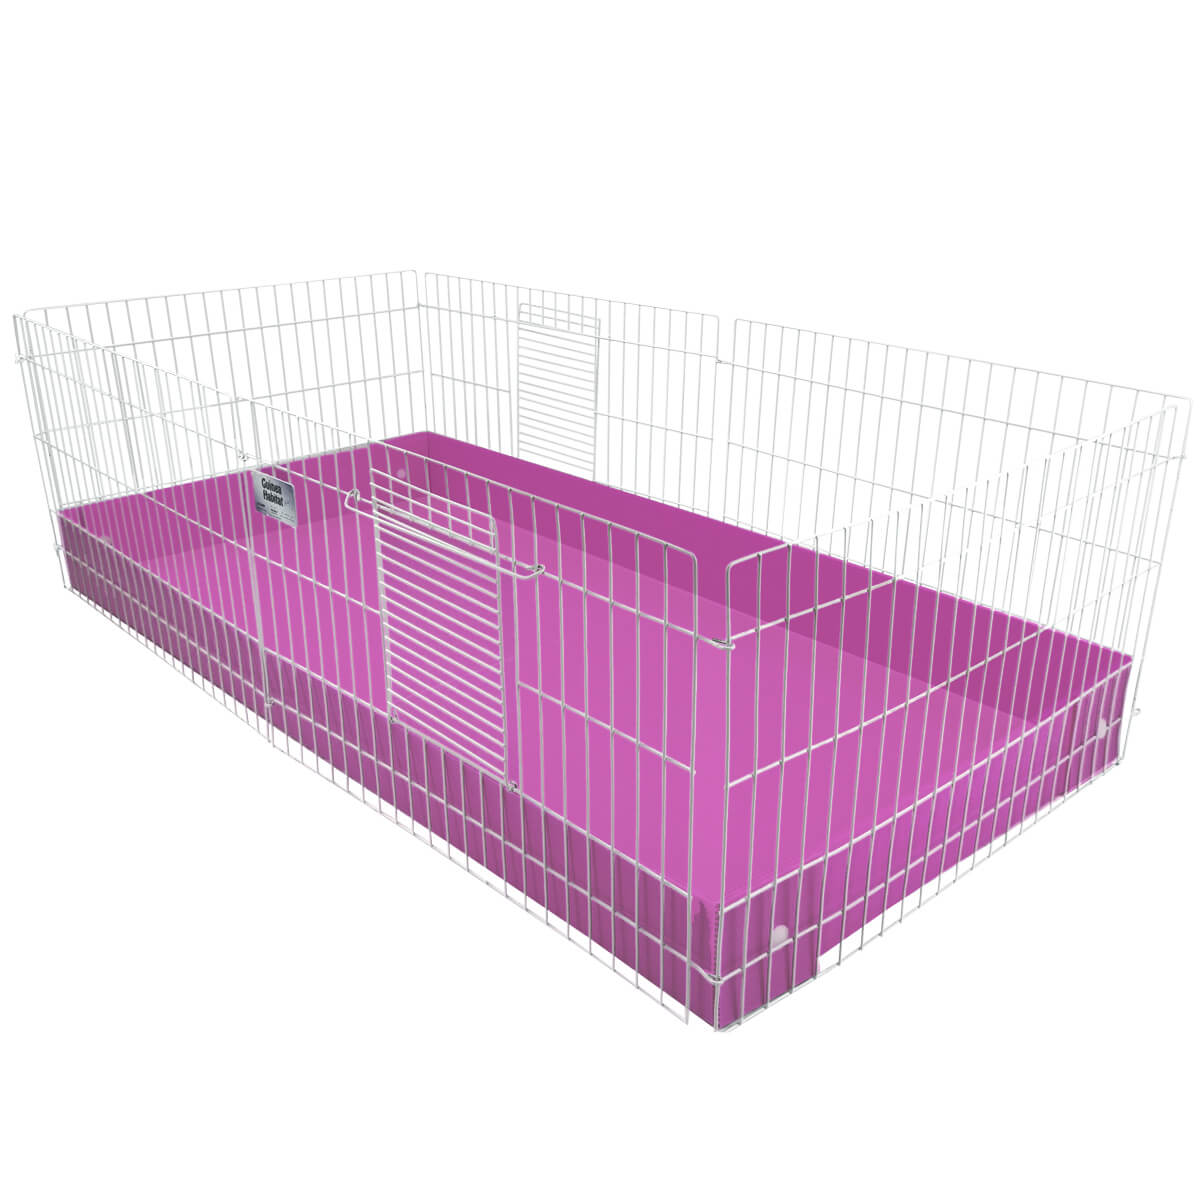 Coroplast Base for a Midwest Habitat Guinea Pig Cage